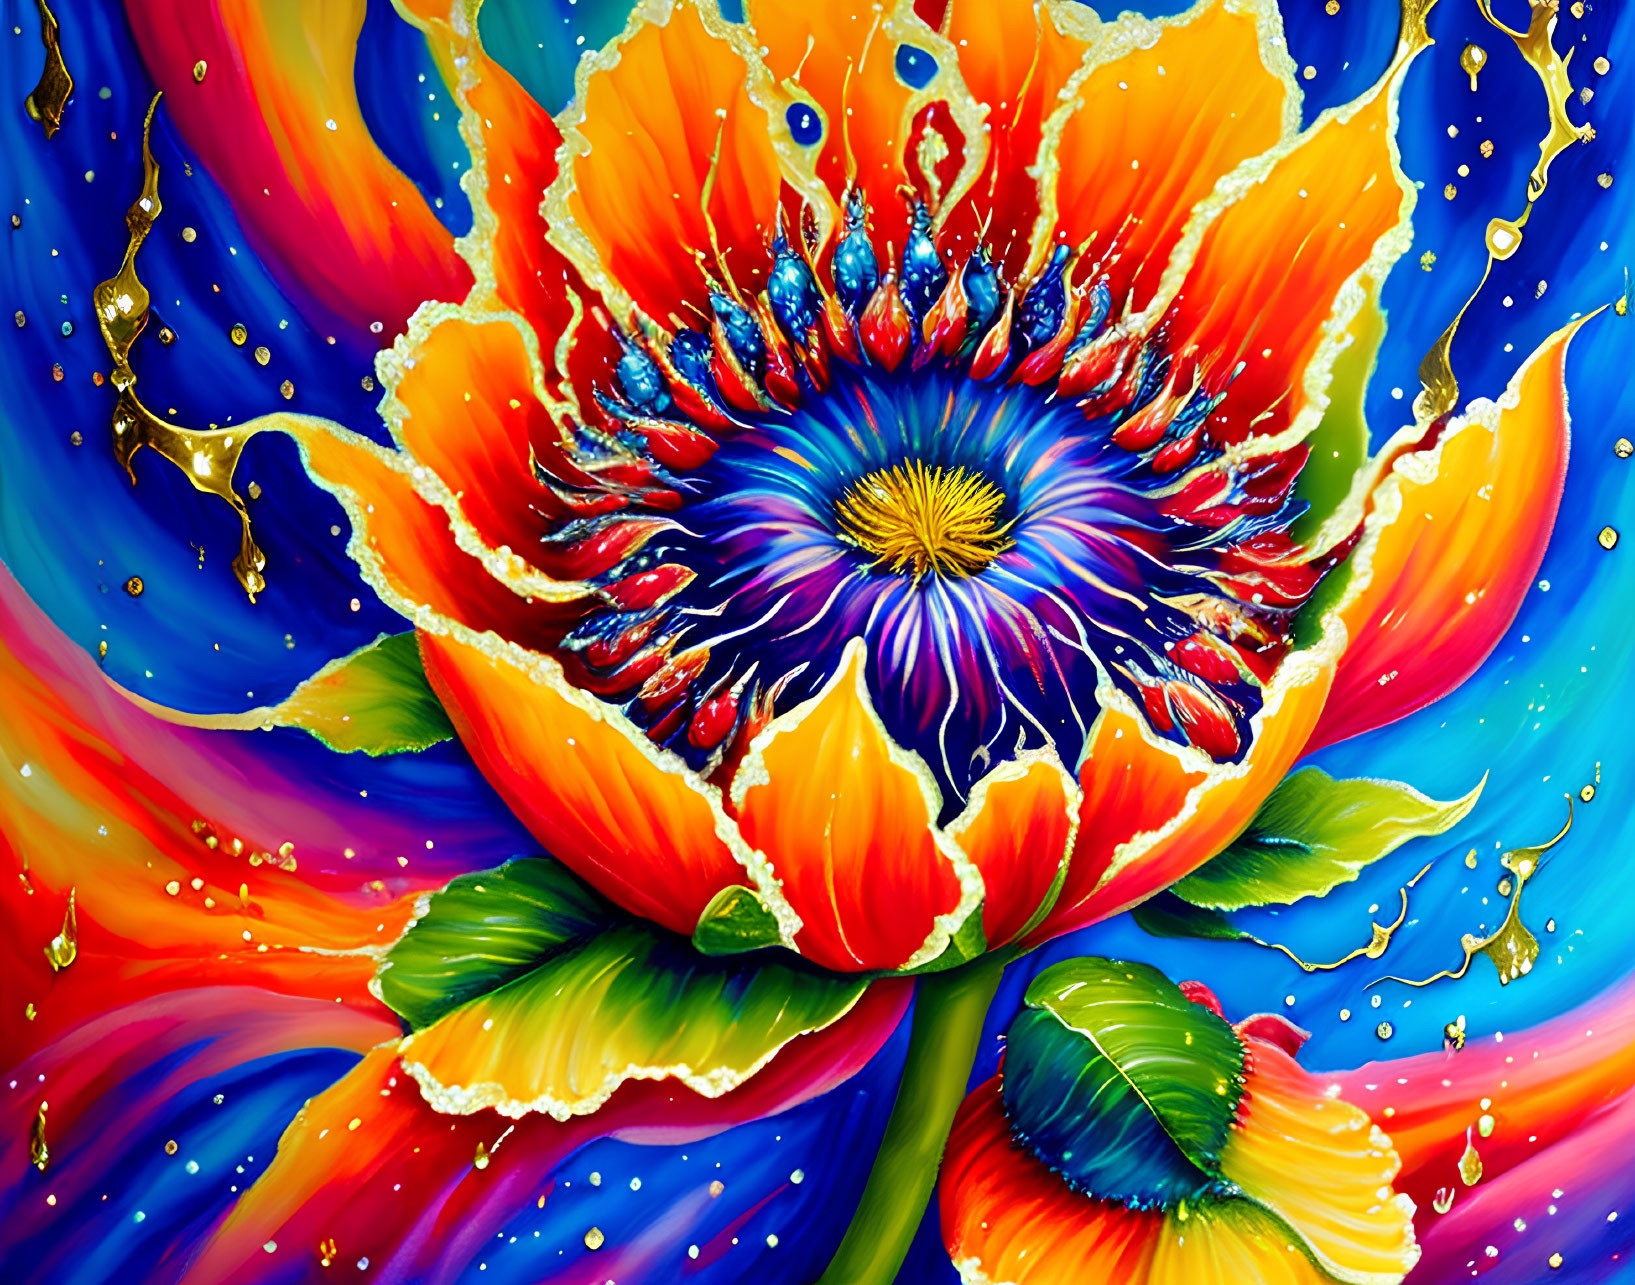 Colorful Flower Painting with Blue and Gold Splashes in Vibrant Hues